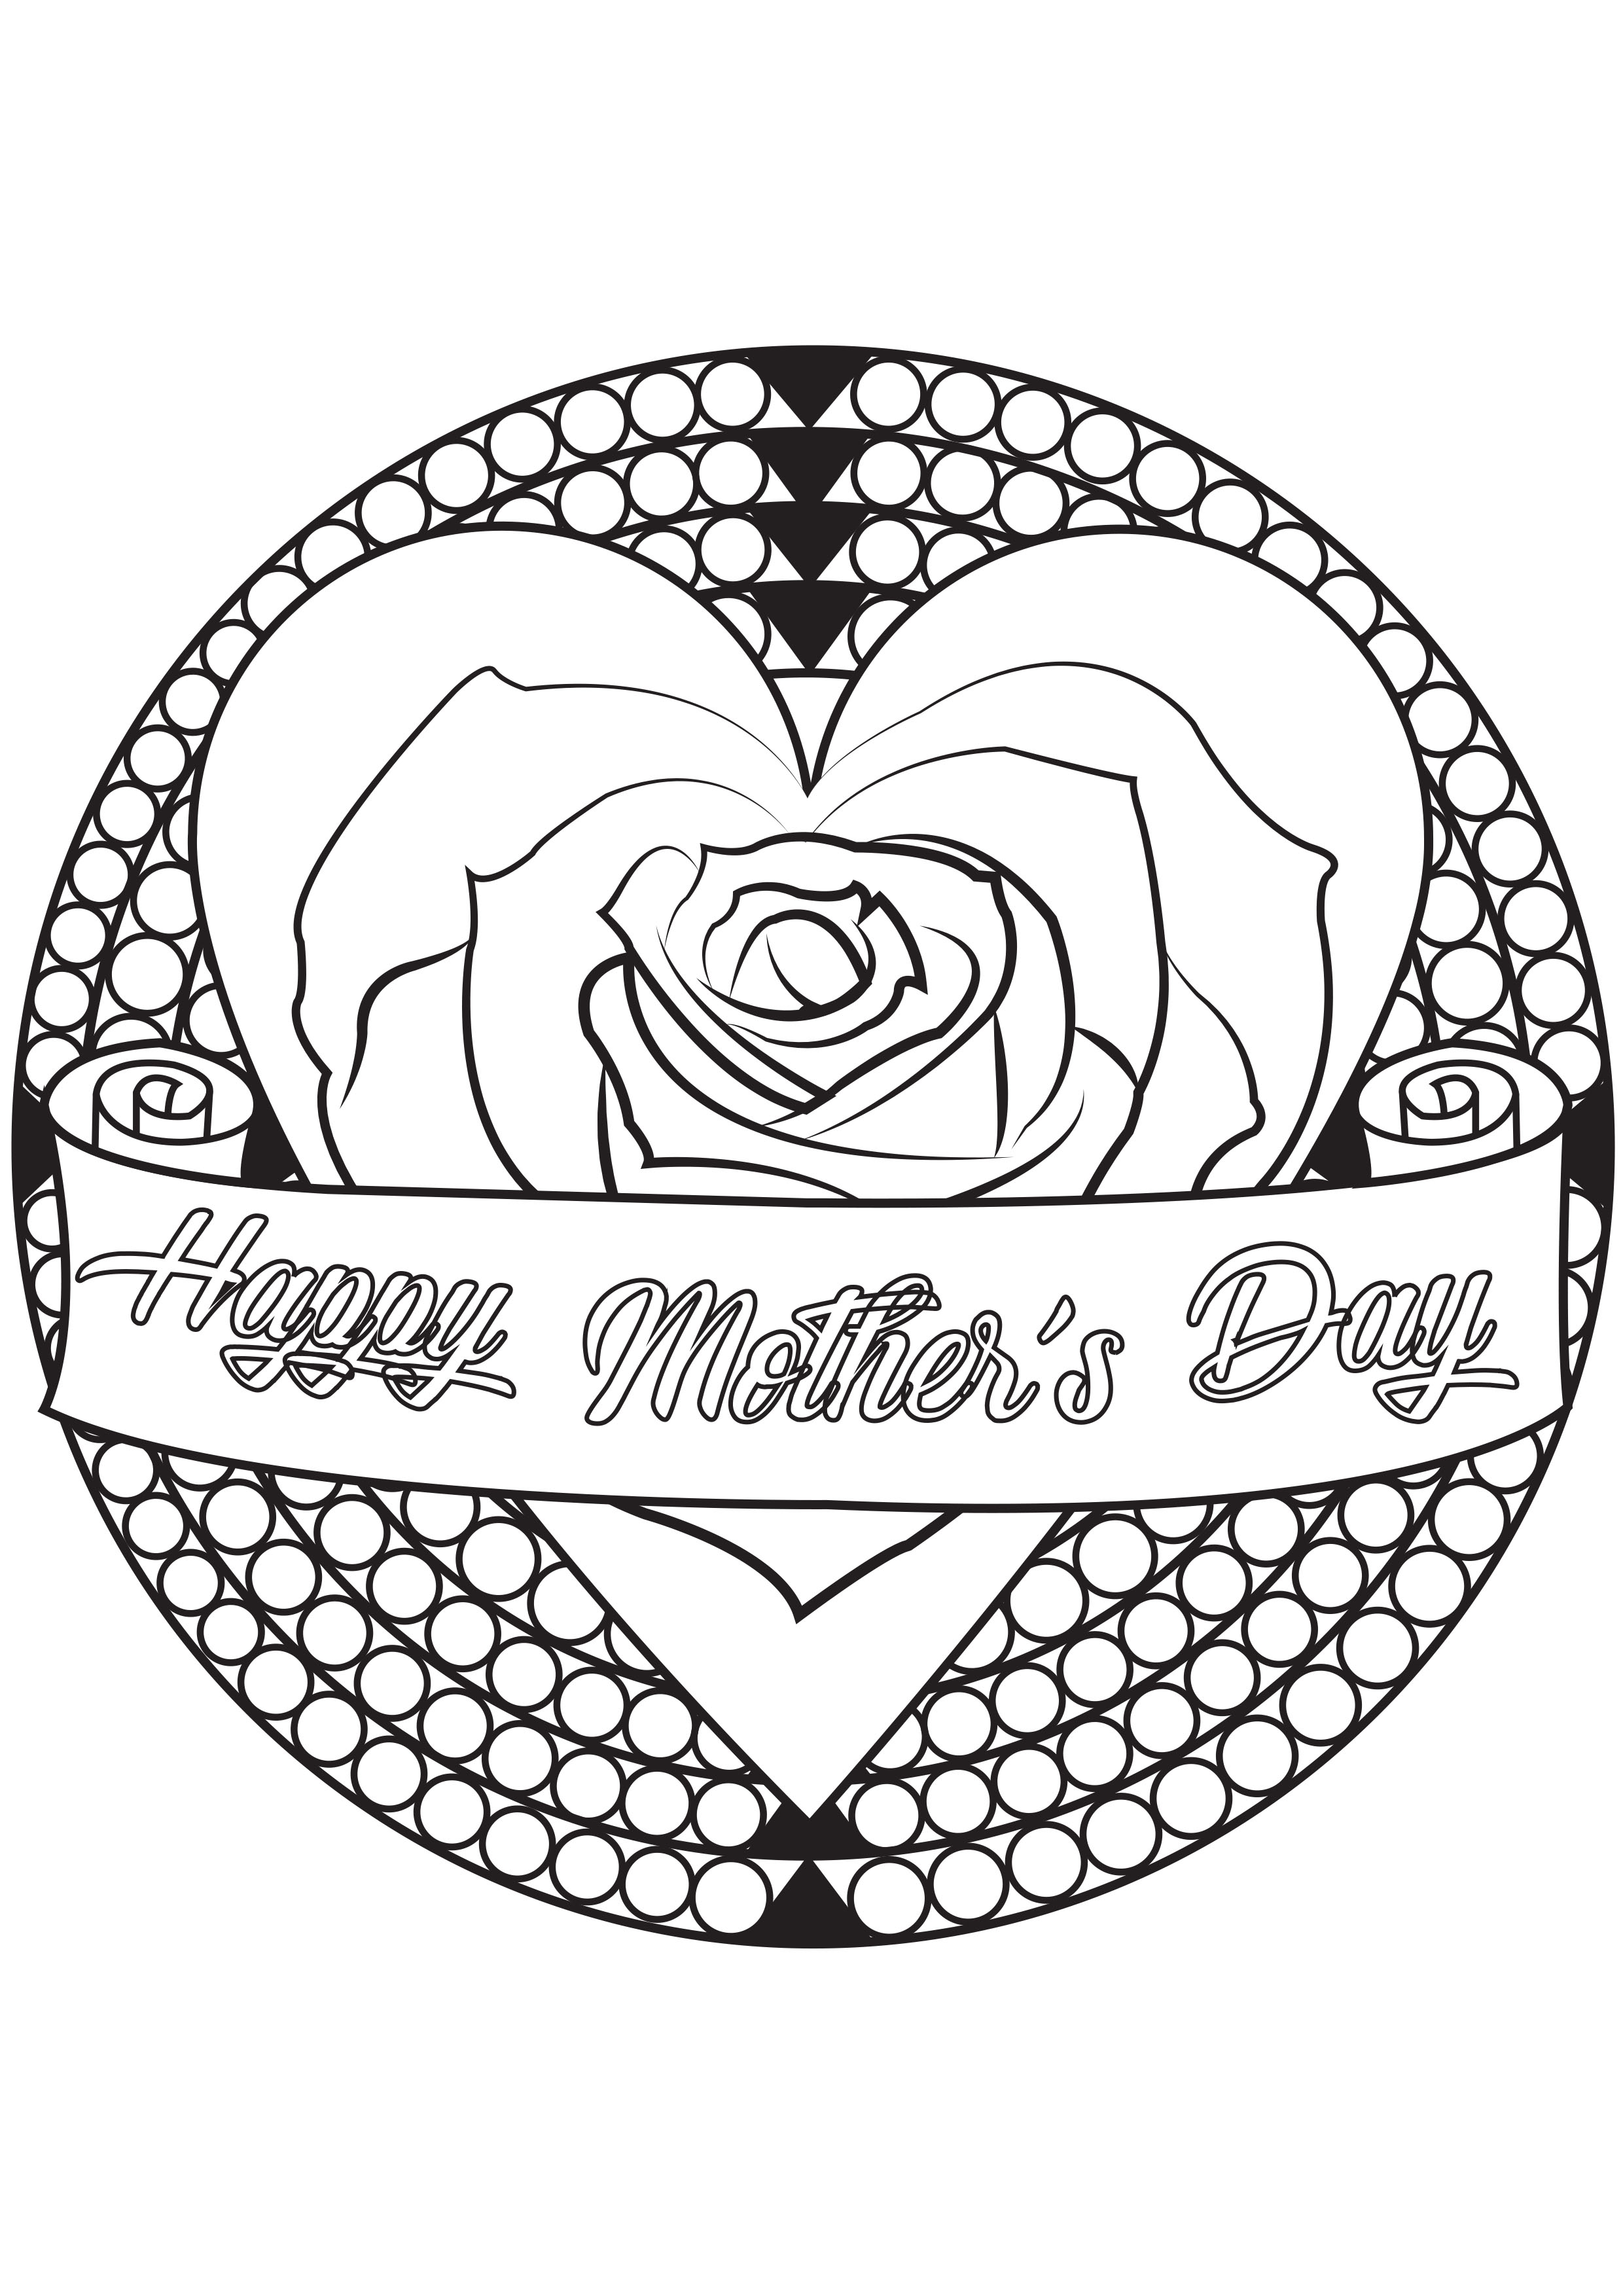 coloring pages for adults Mother day by allan Print